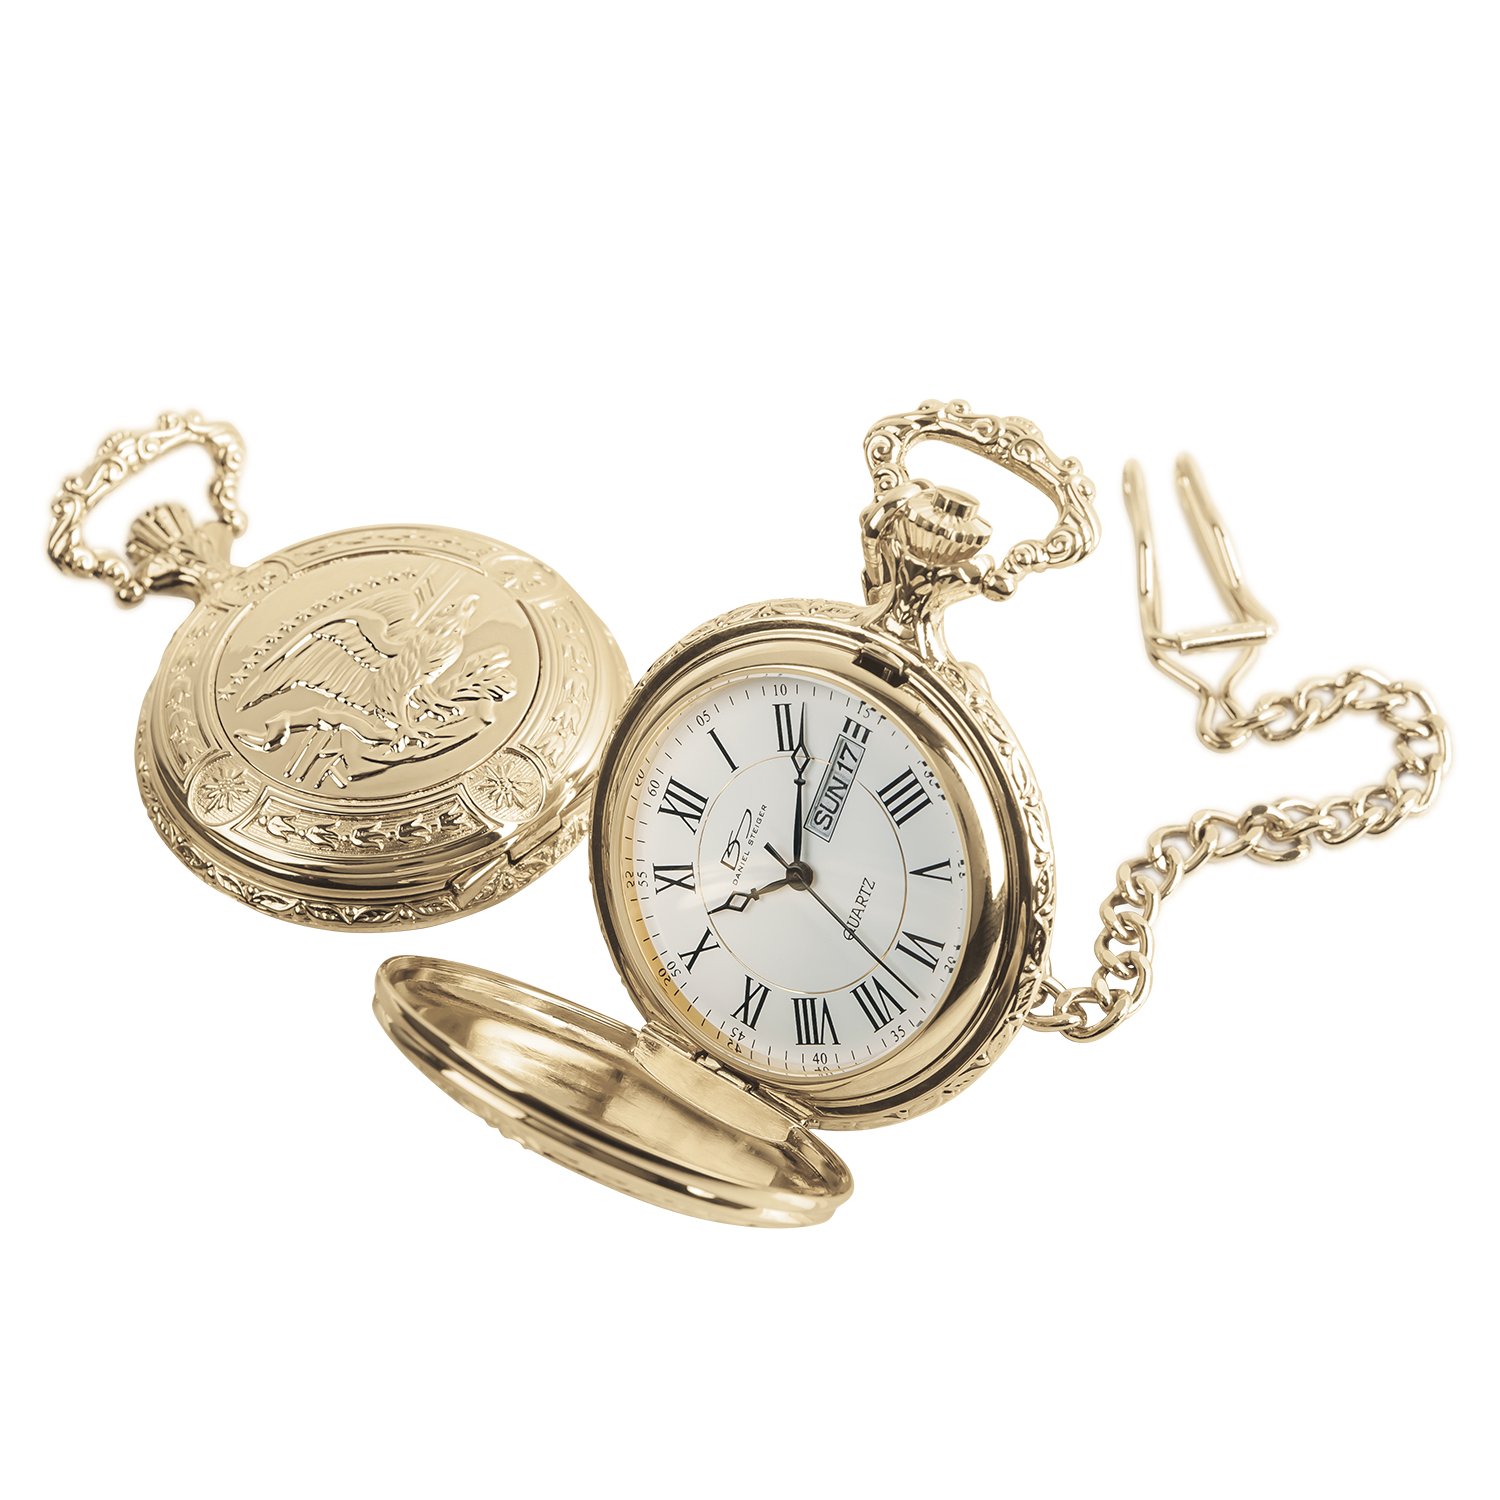 Daniel Steiger American Eagle Luxury Vintage Hunter Pocket Watch with Chain - 18k Gold Plating - Hand-Made Hunter Pocket Watch - Engraved Flying Eagle Design - White Dial with Black Roman Numerals